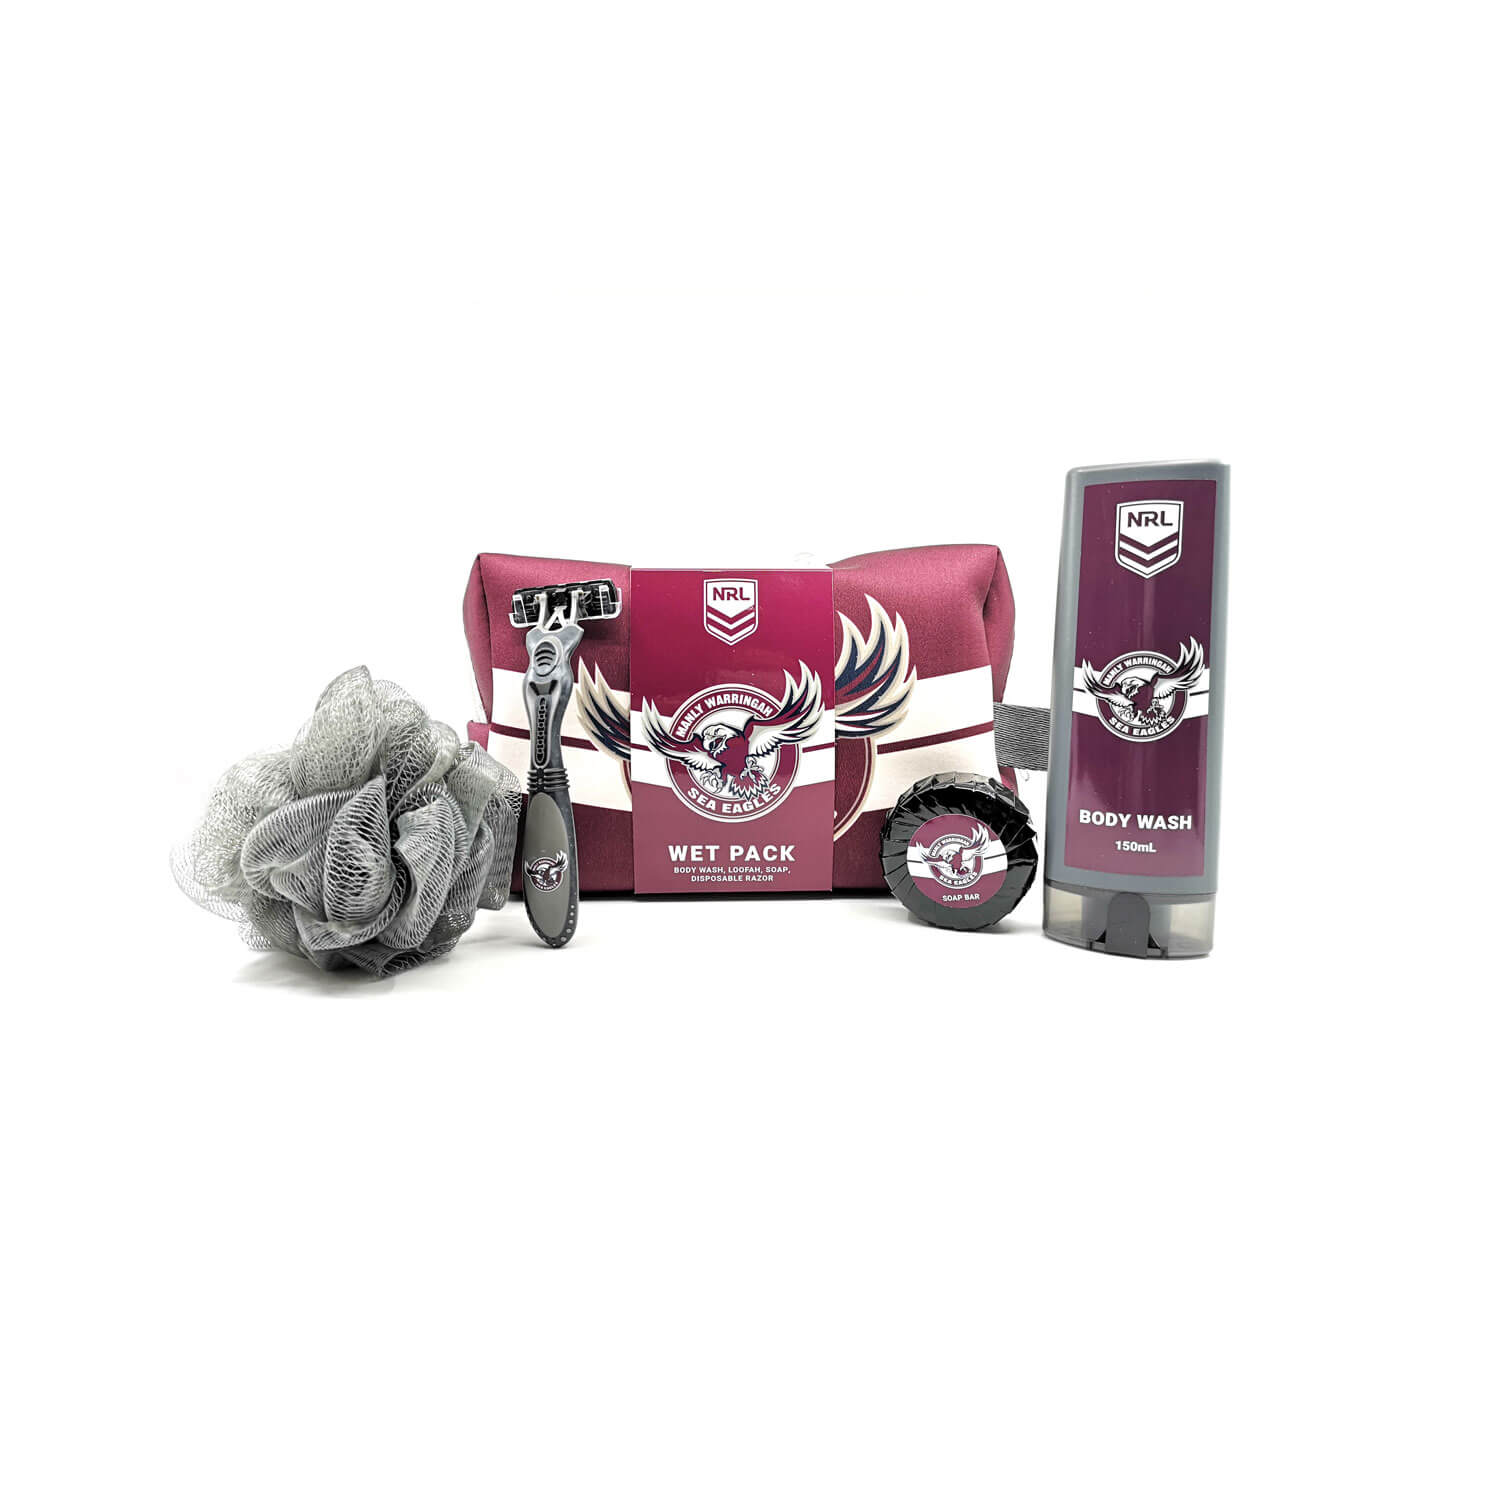 Manly Sea Eagles NRL Toiletry Set!